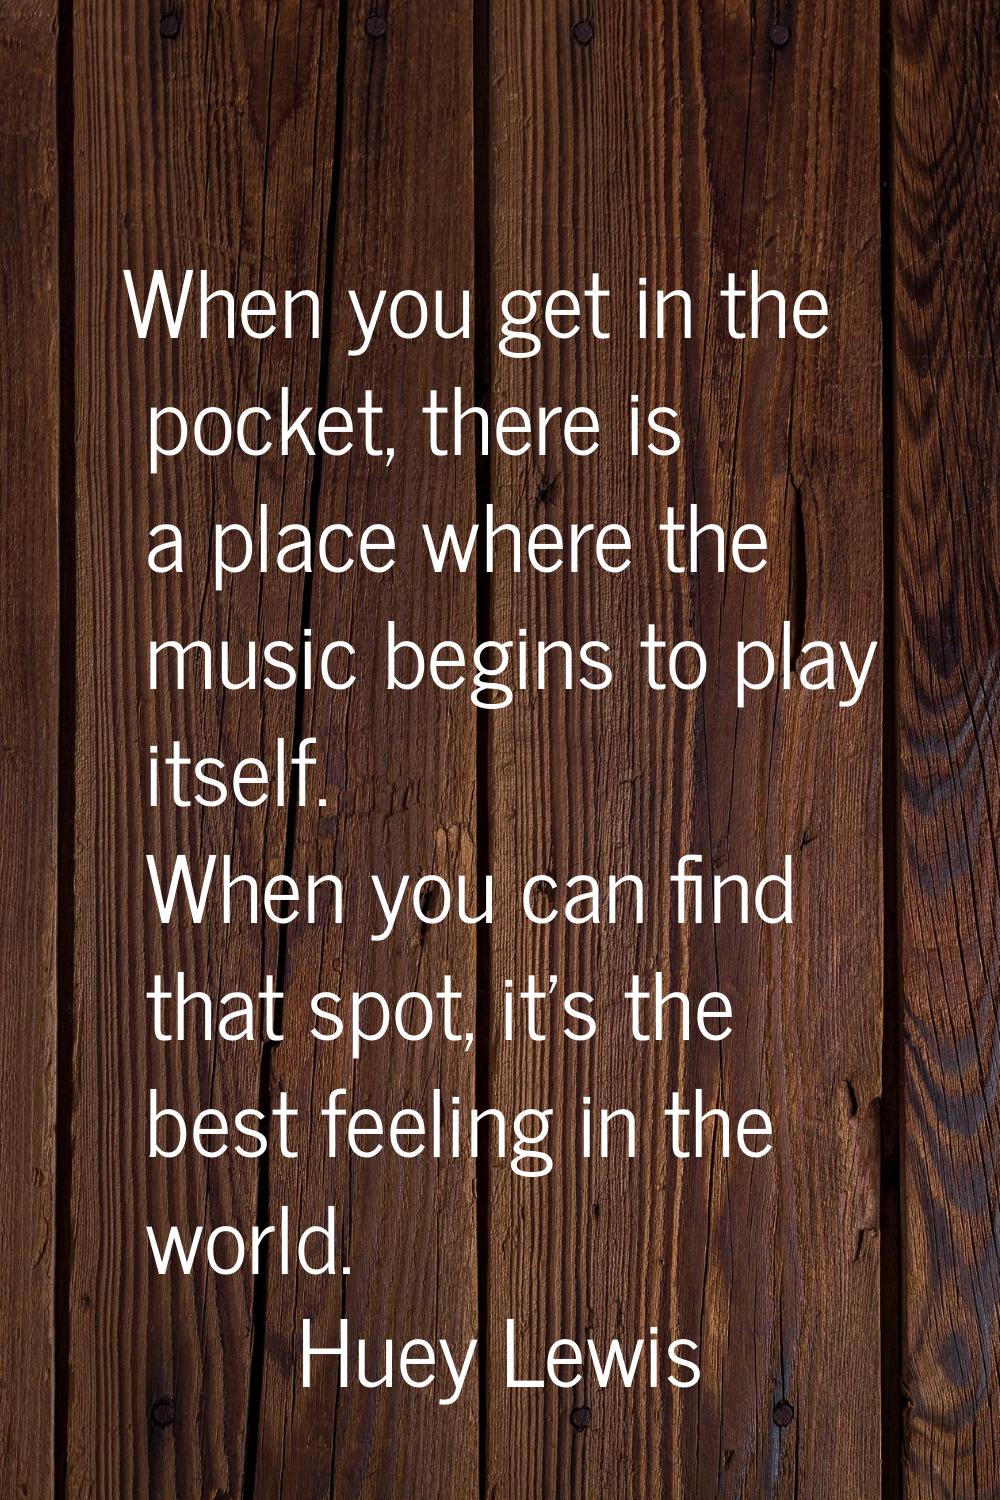 When you get in the pocket, there is a place where the music begins to play itself. When you can fi